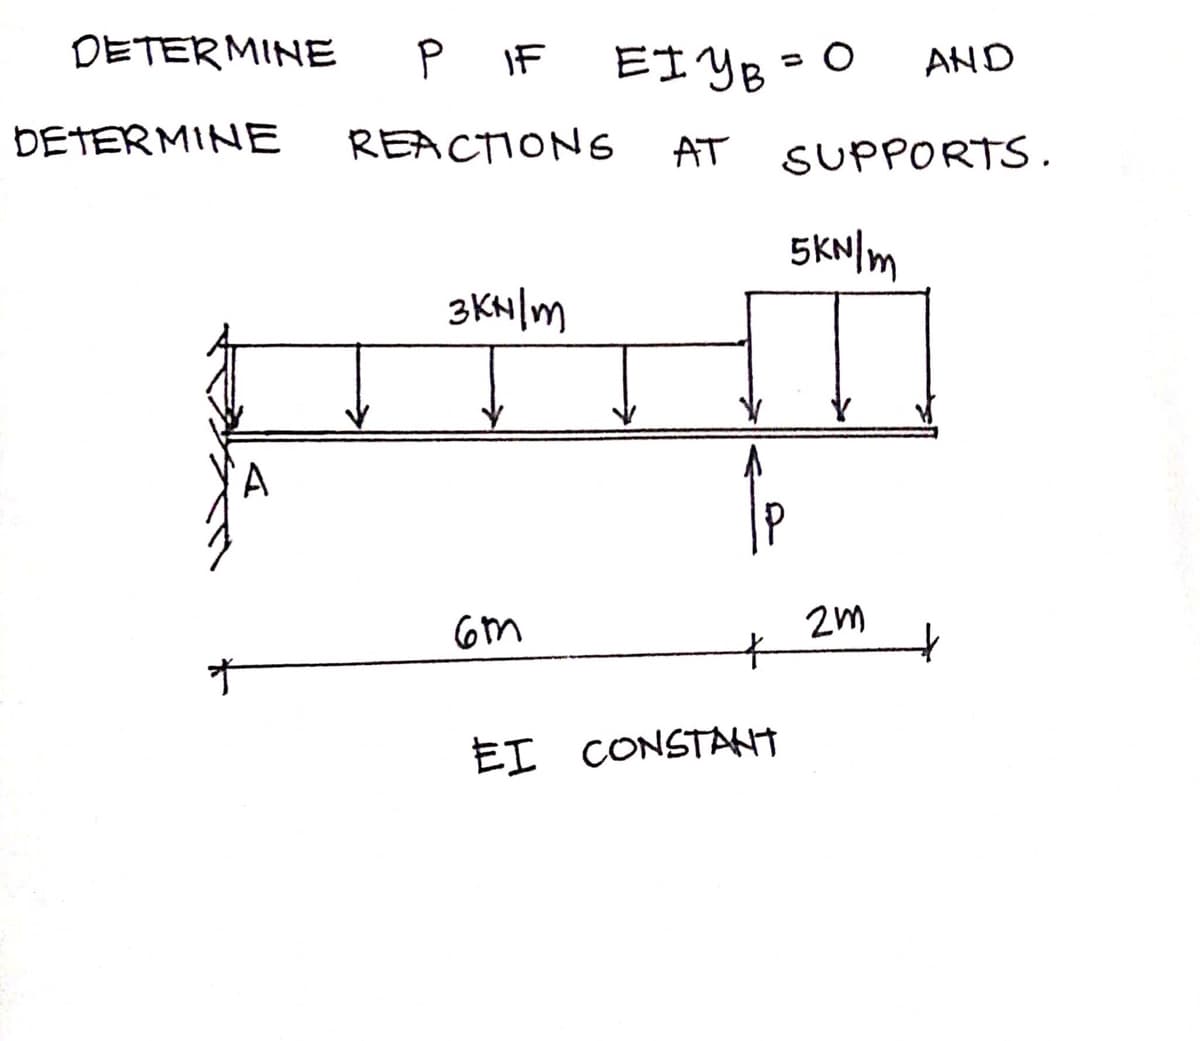 DETERMINE
P IF
EI YB = 0
AND
DETERMINE
REACTIONS
AT
SUPPORTS.
5KNIM
3KN|m
2m
EI CONSTANT
